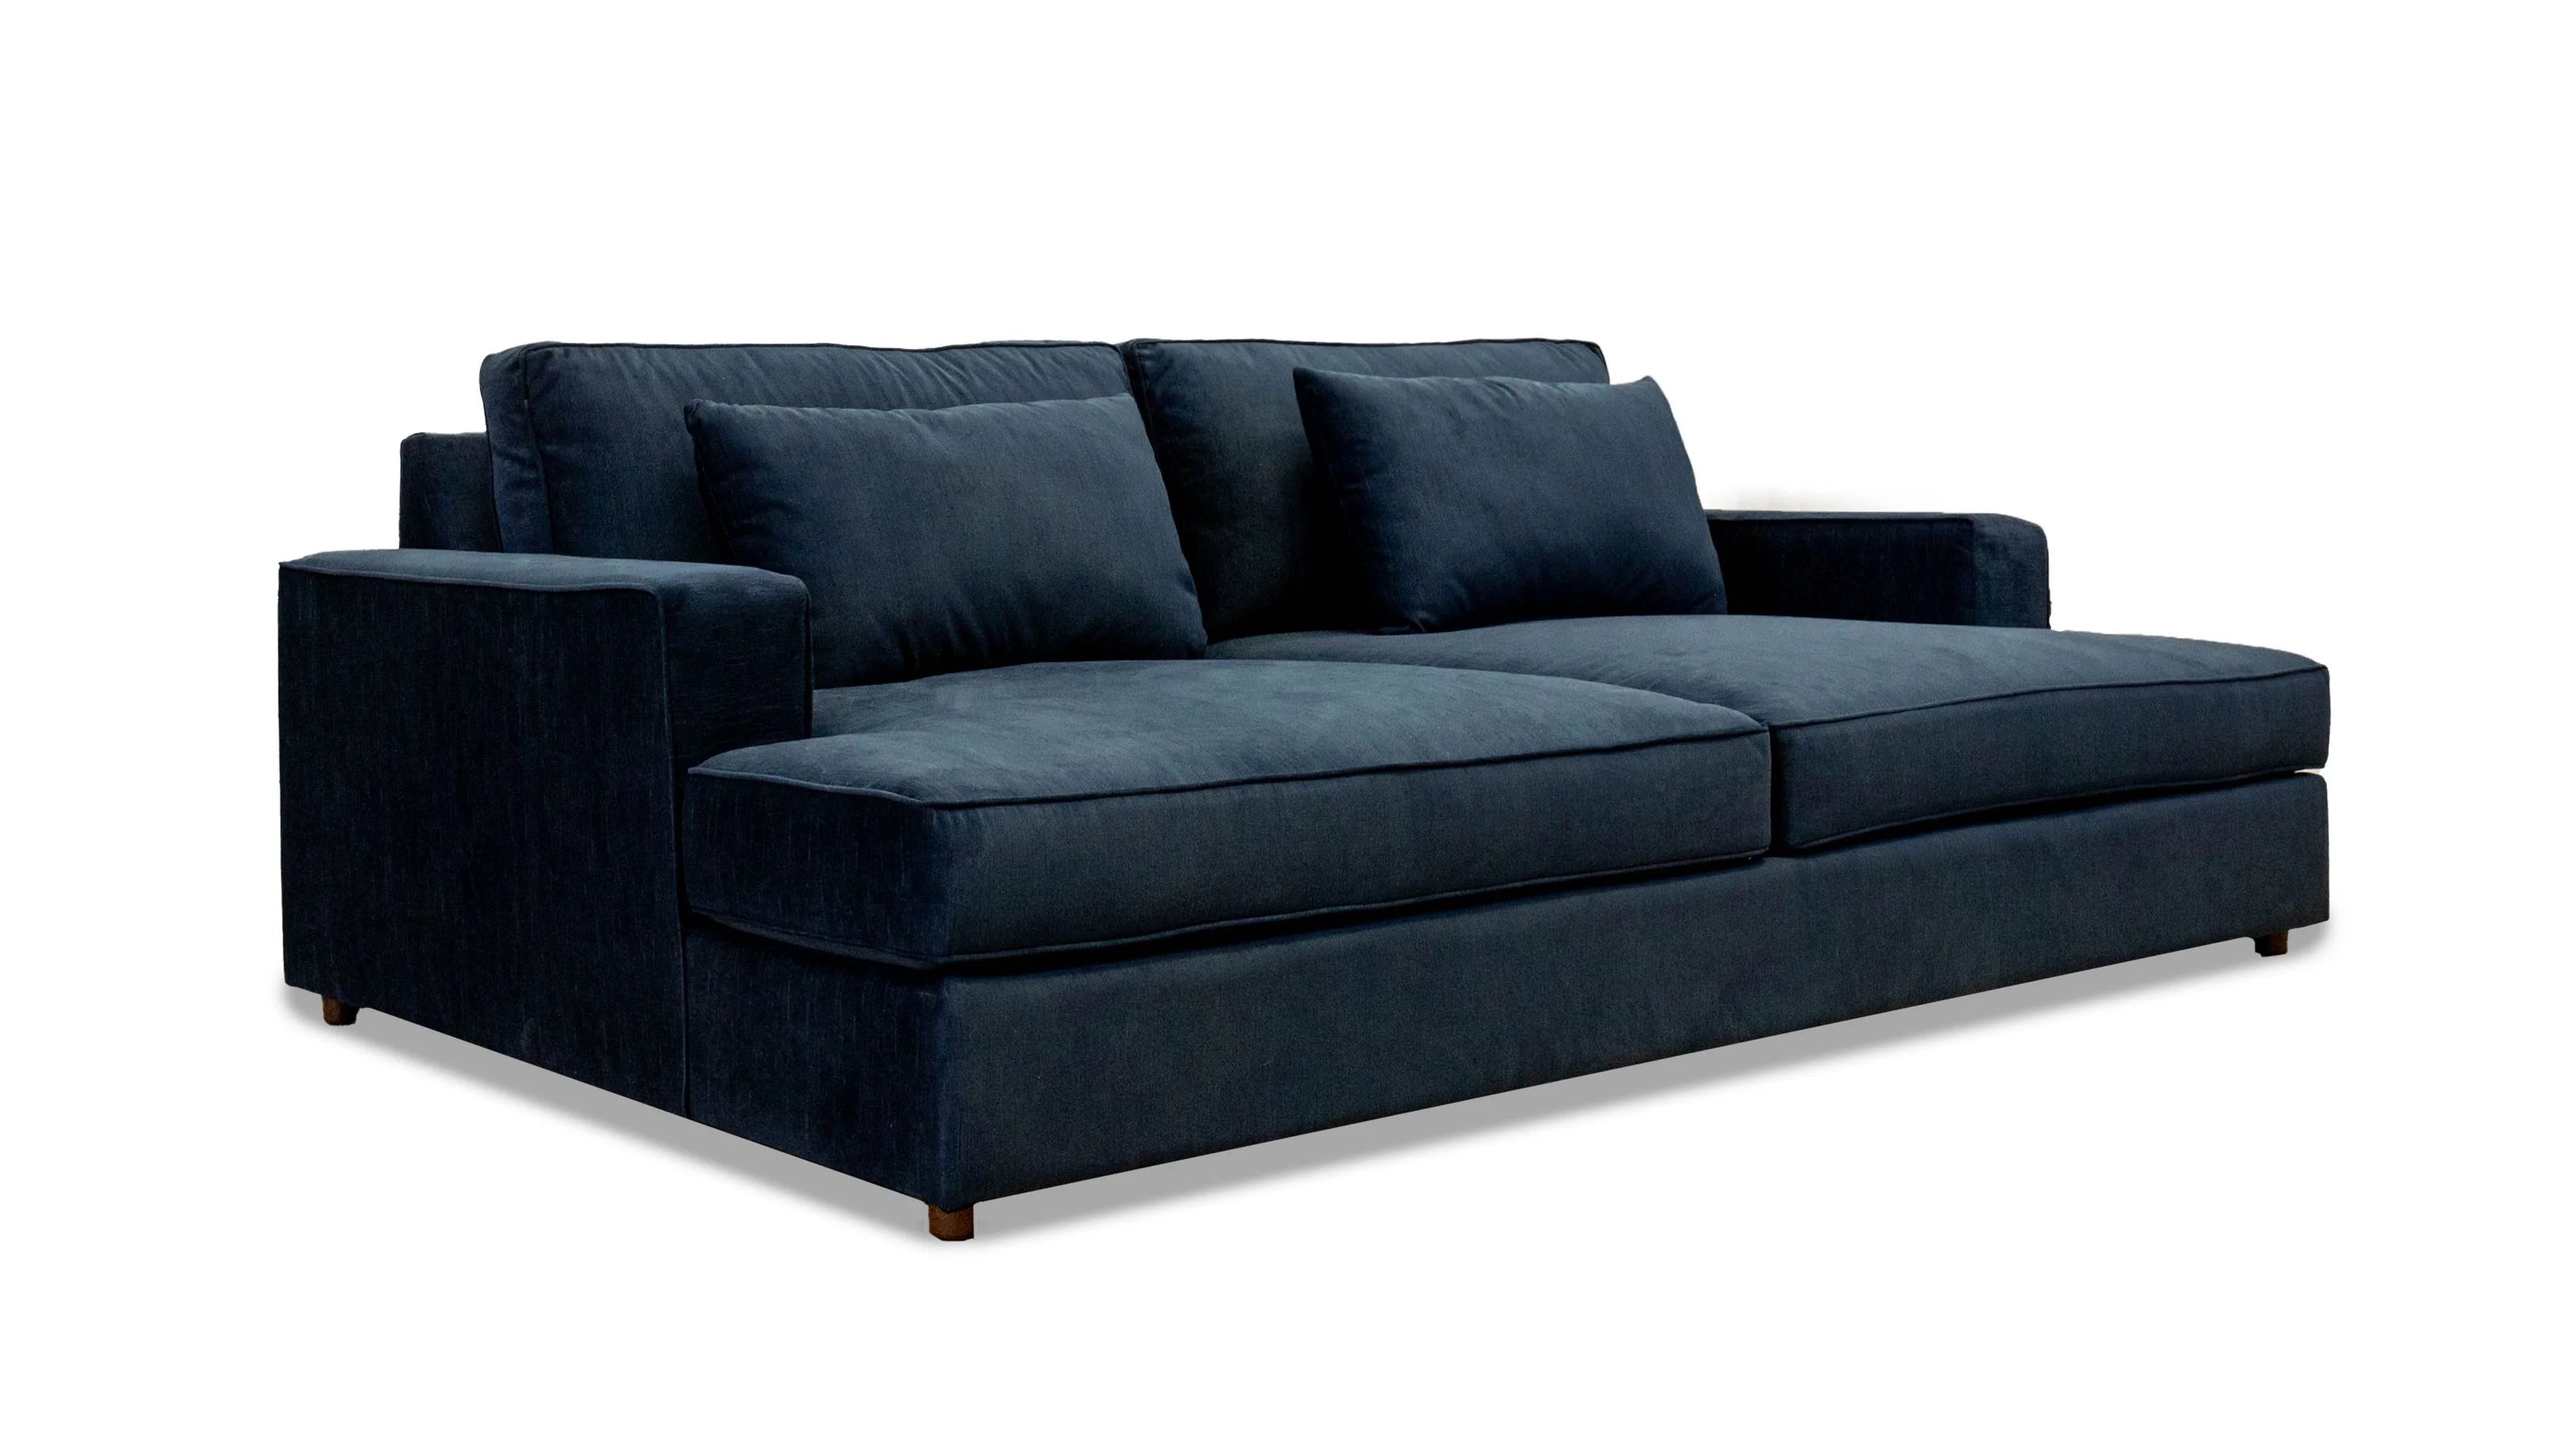 Bailey 96" Square Arm Sofa with Reversible Cushions | Wayfair North America